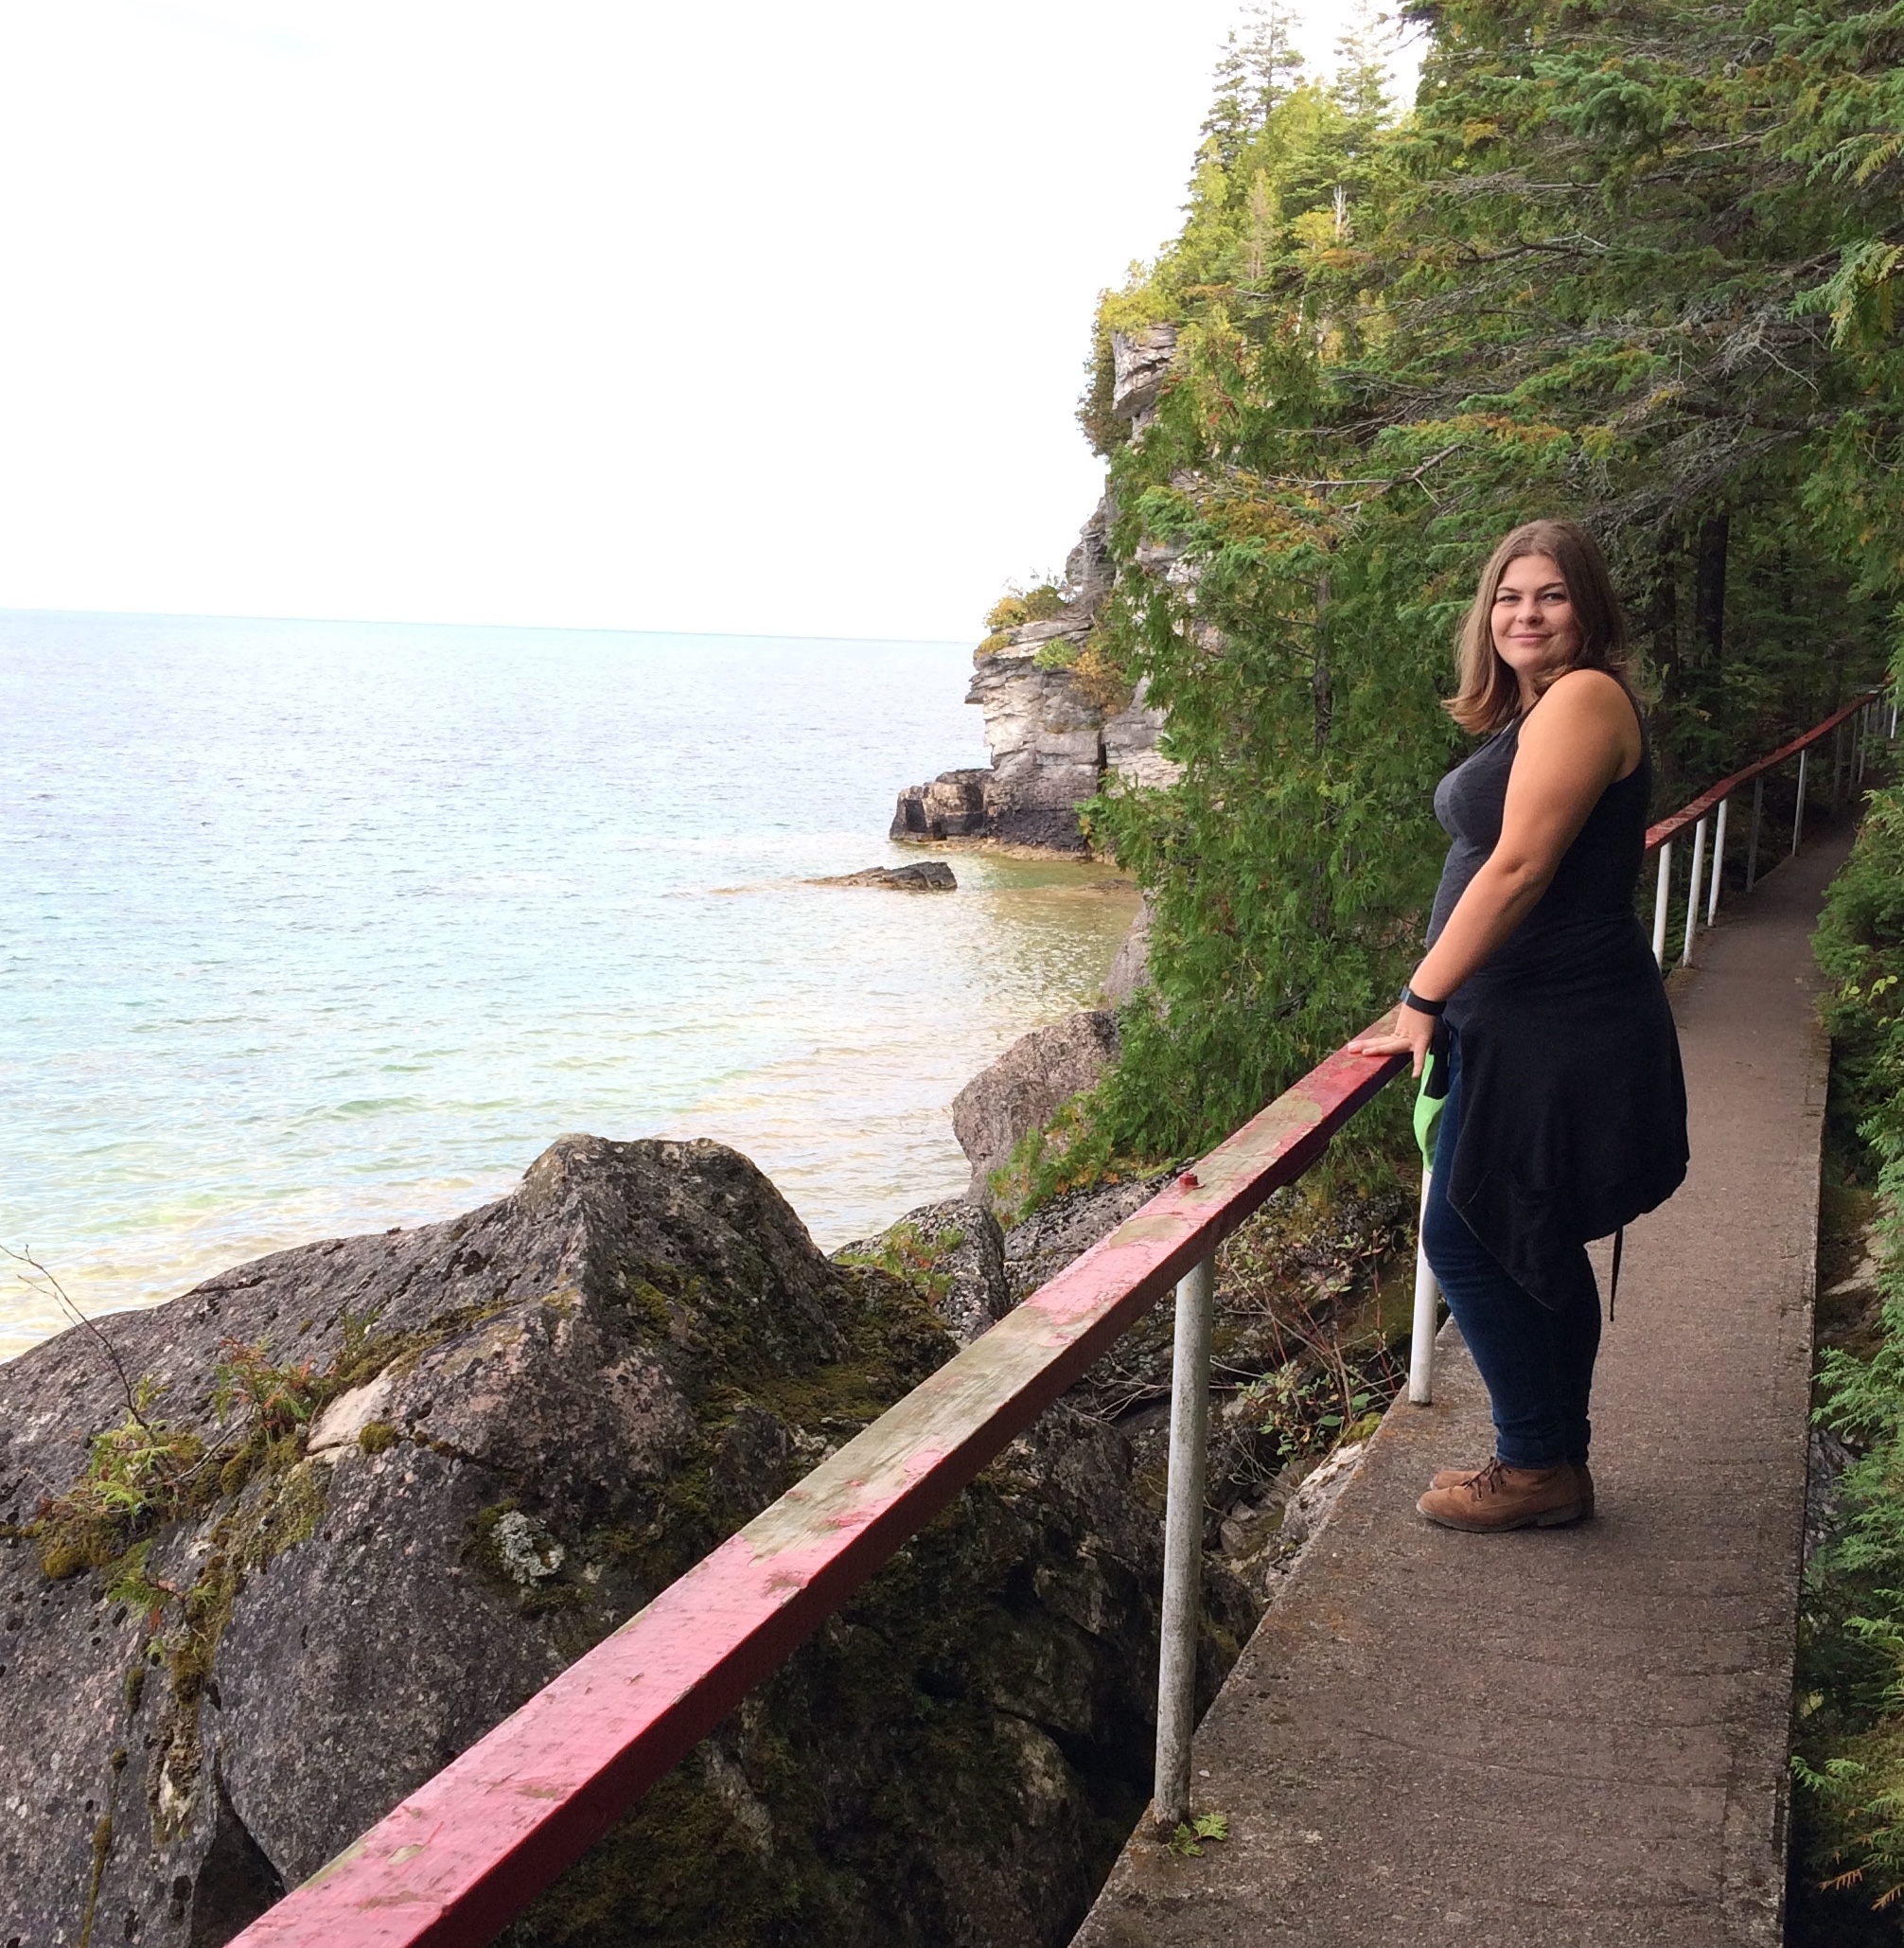 photo of Jen Pike in Tobermory Ontario, standing by a railing next to the water